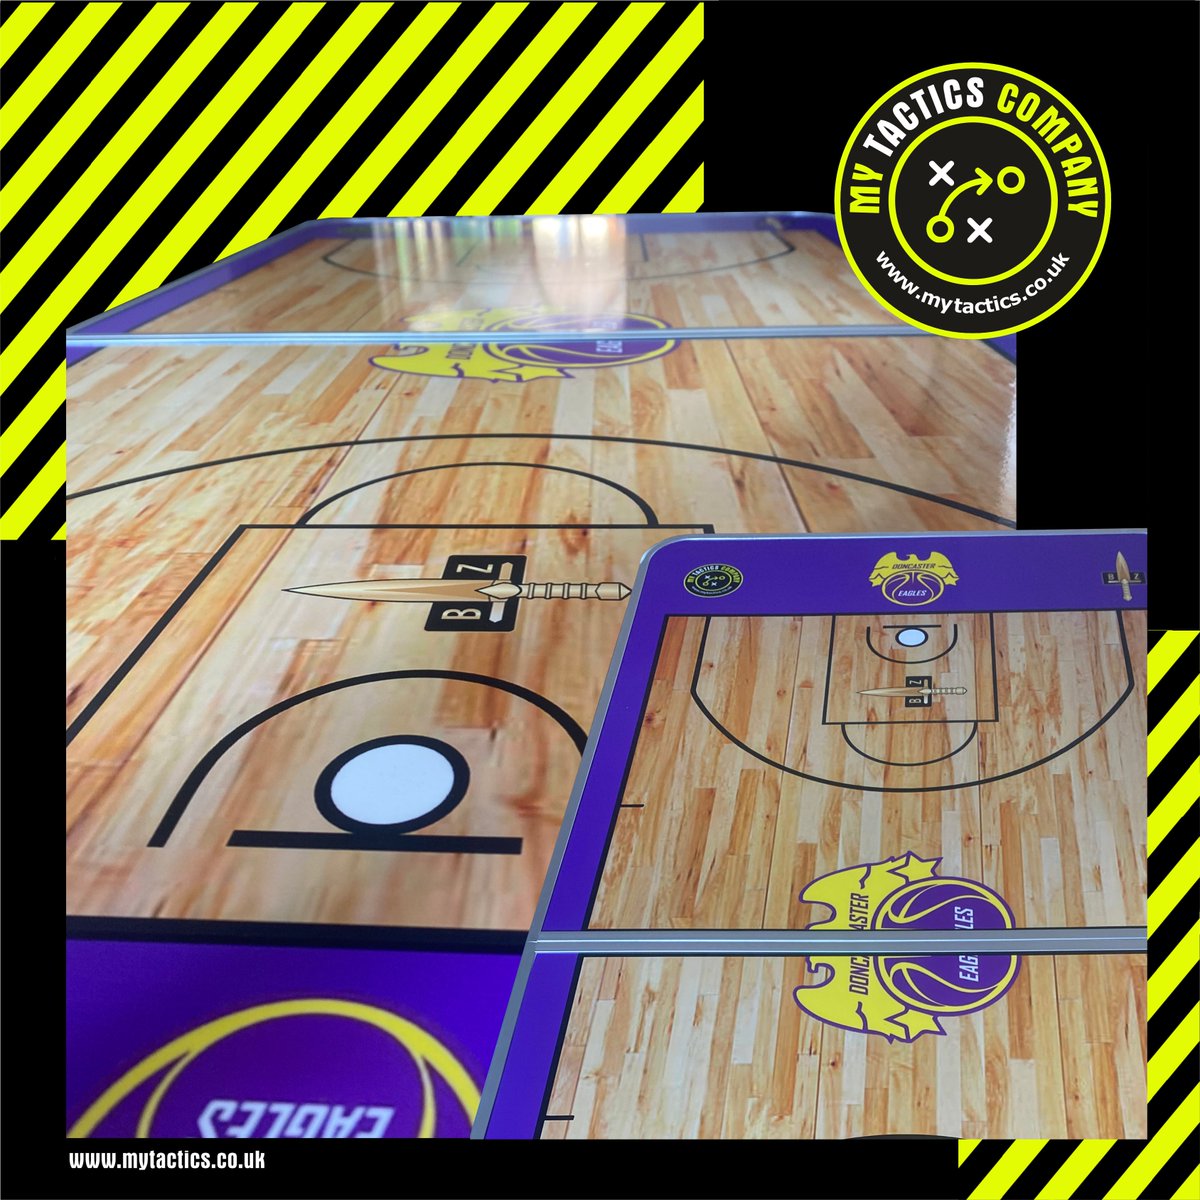 Take a look at our first basketball tactics table, looking forward to seeing how @DanumEagles utilise our table. Personalise your tactical session! mytactics.co.uk #football #basketball #futsal #netball #rugby #hockey #coaching #coach #sports #MTC #Tactics #tactical